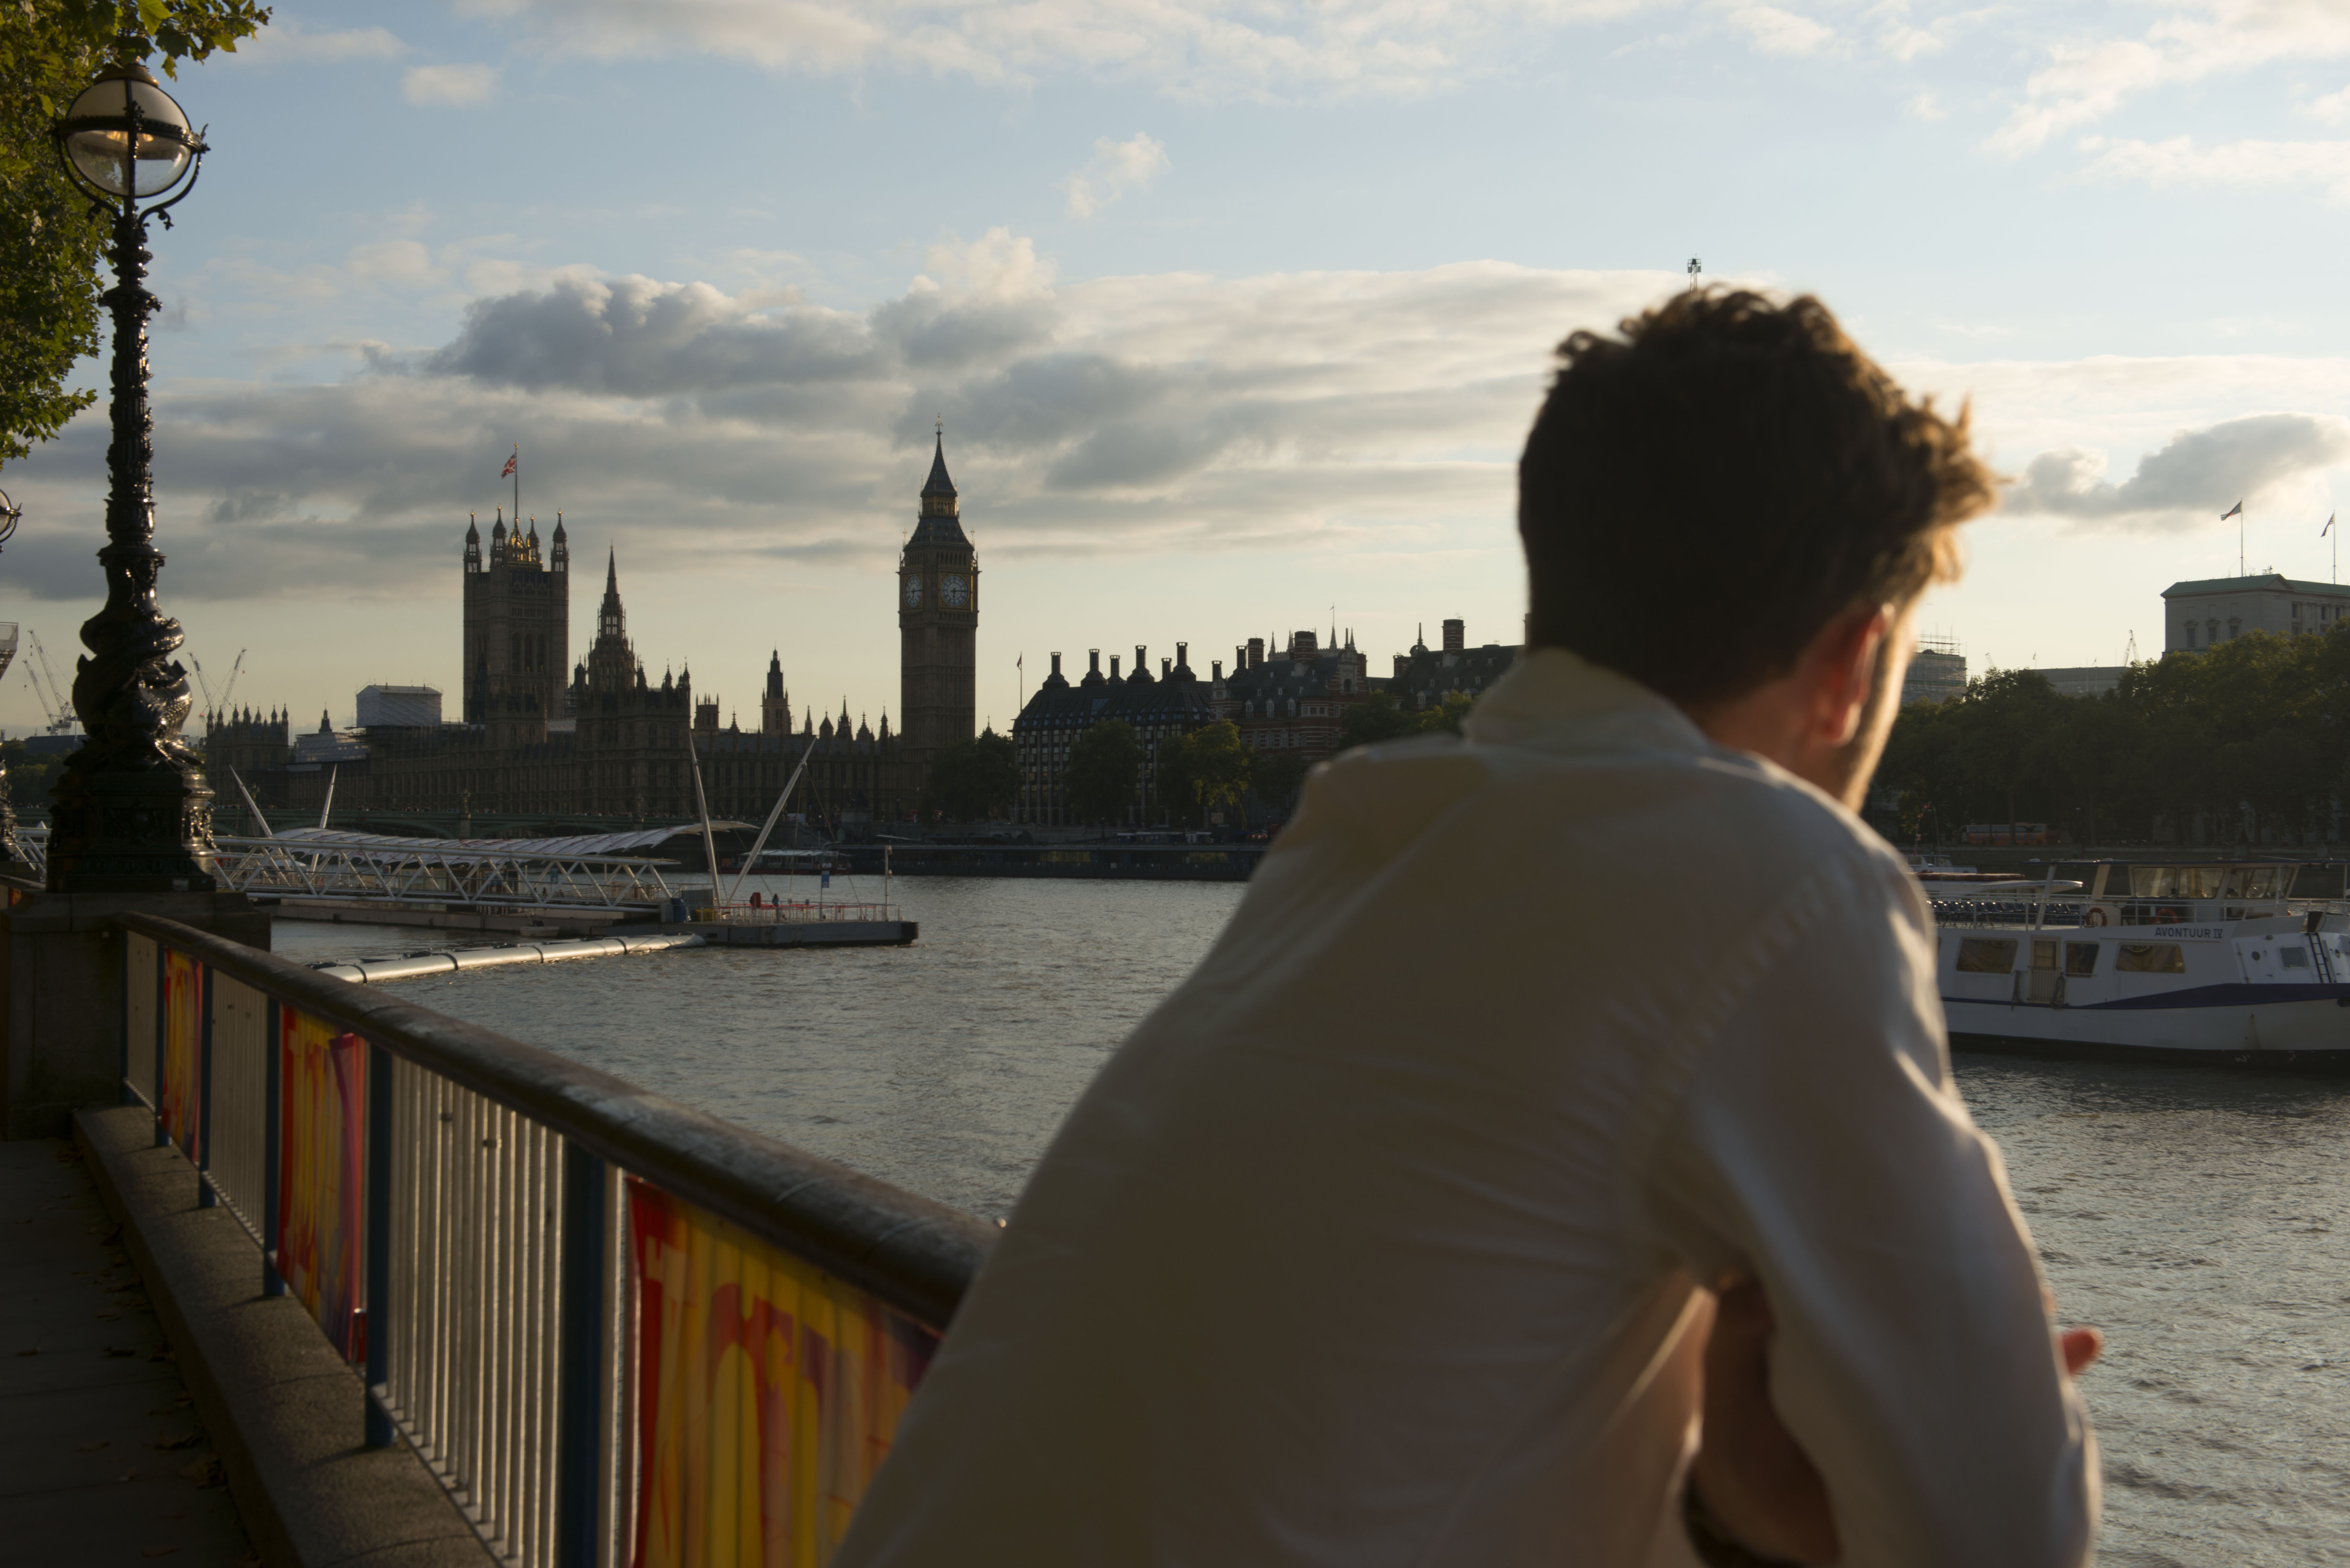 A close up photograph of a man's back as he looks at the British Houses of Parliament across the River Thames.